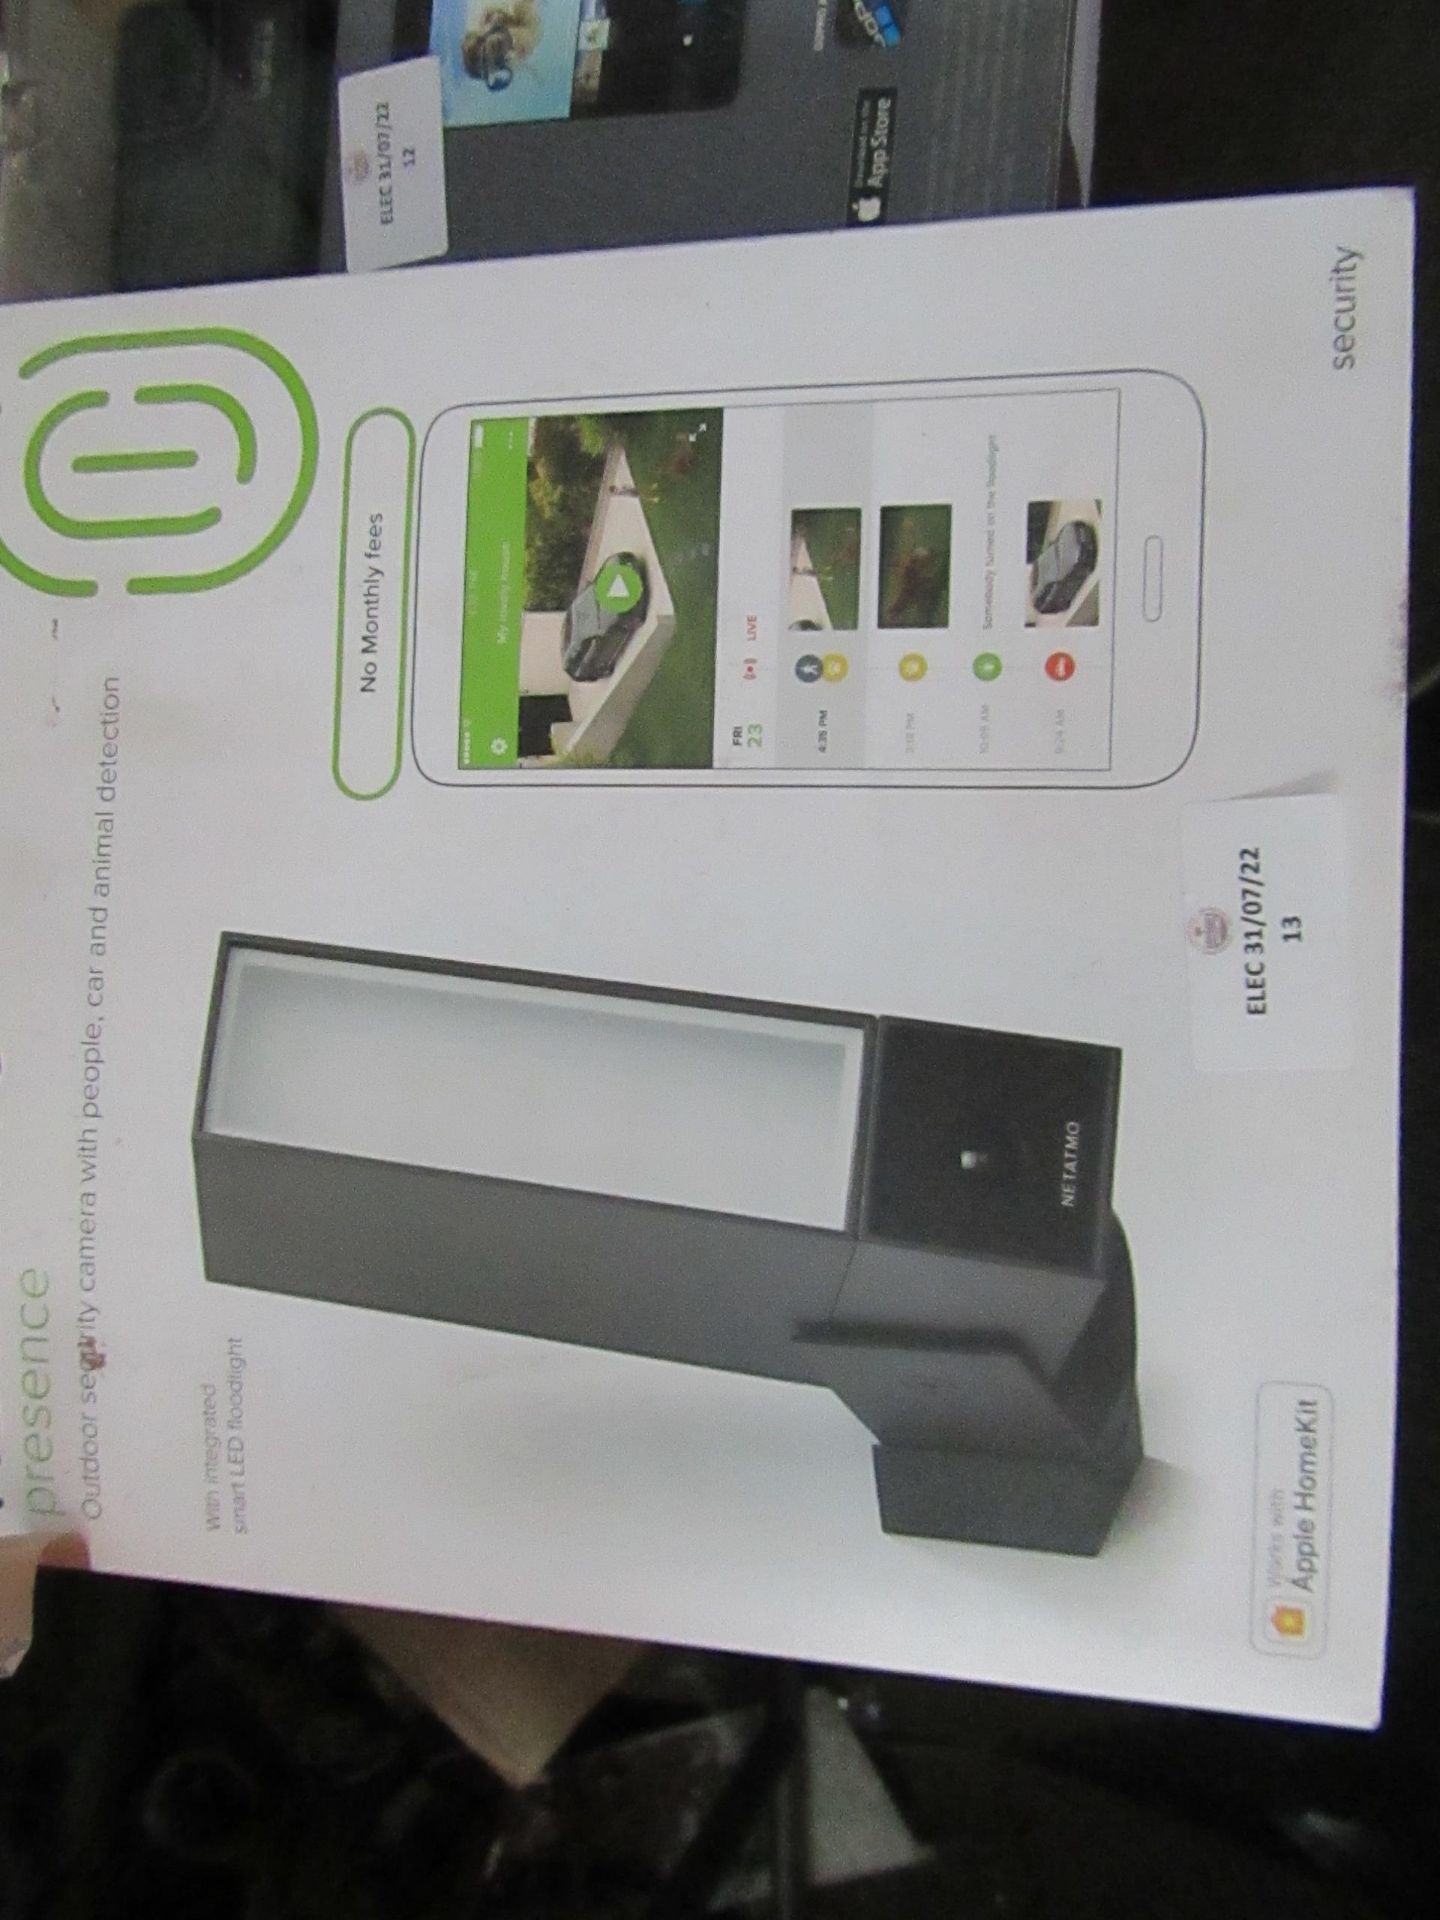 Neatamo Presence outdoor security camera/Light with people, Car and Animal detection, unchecked - Image 2 of 2